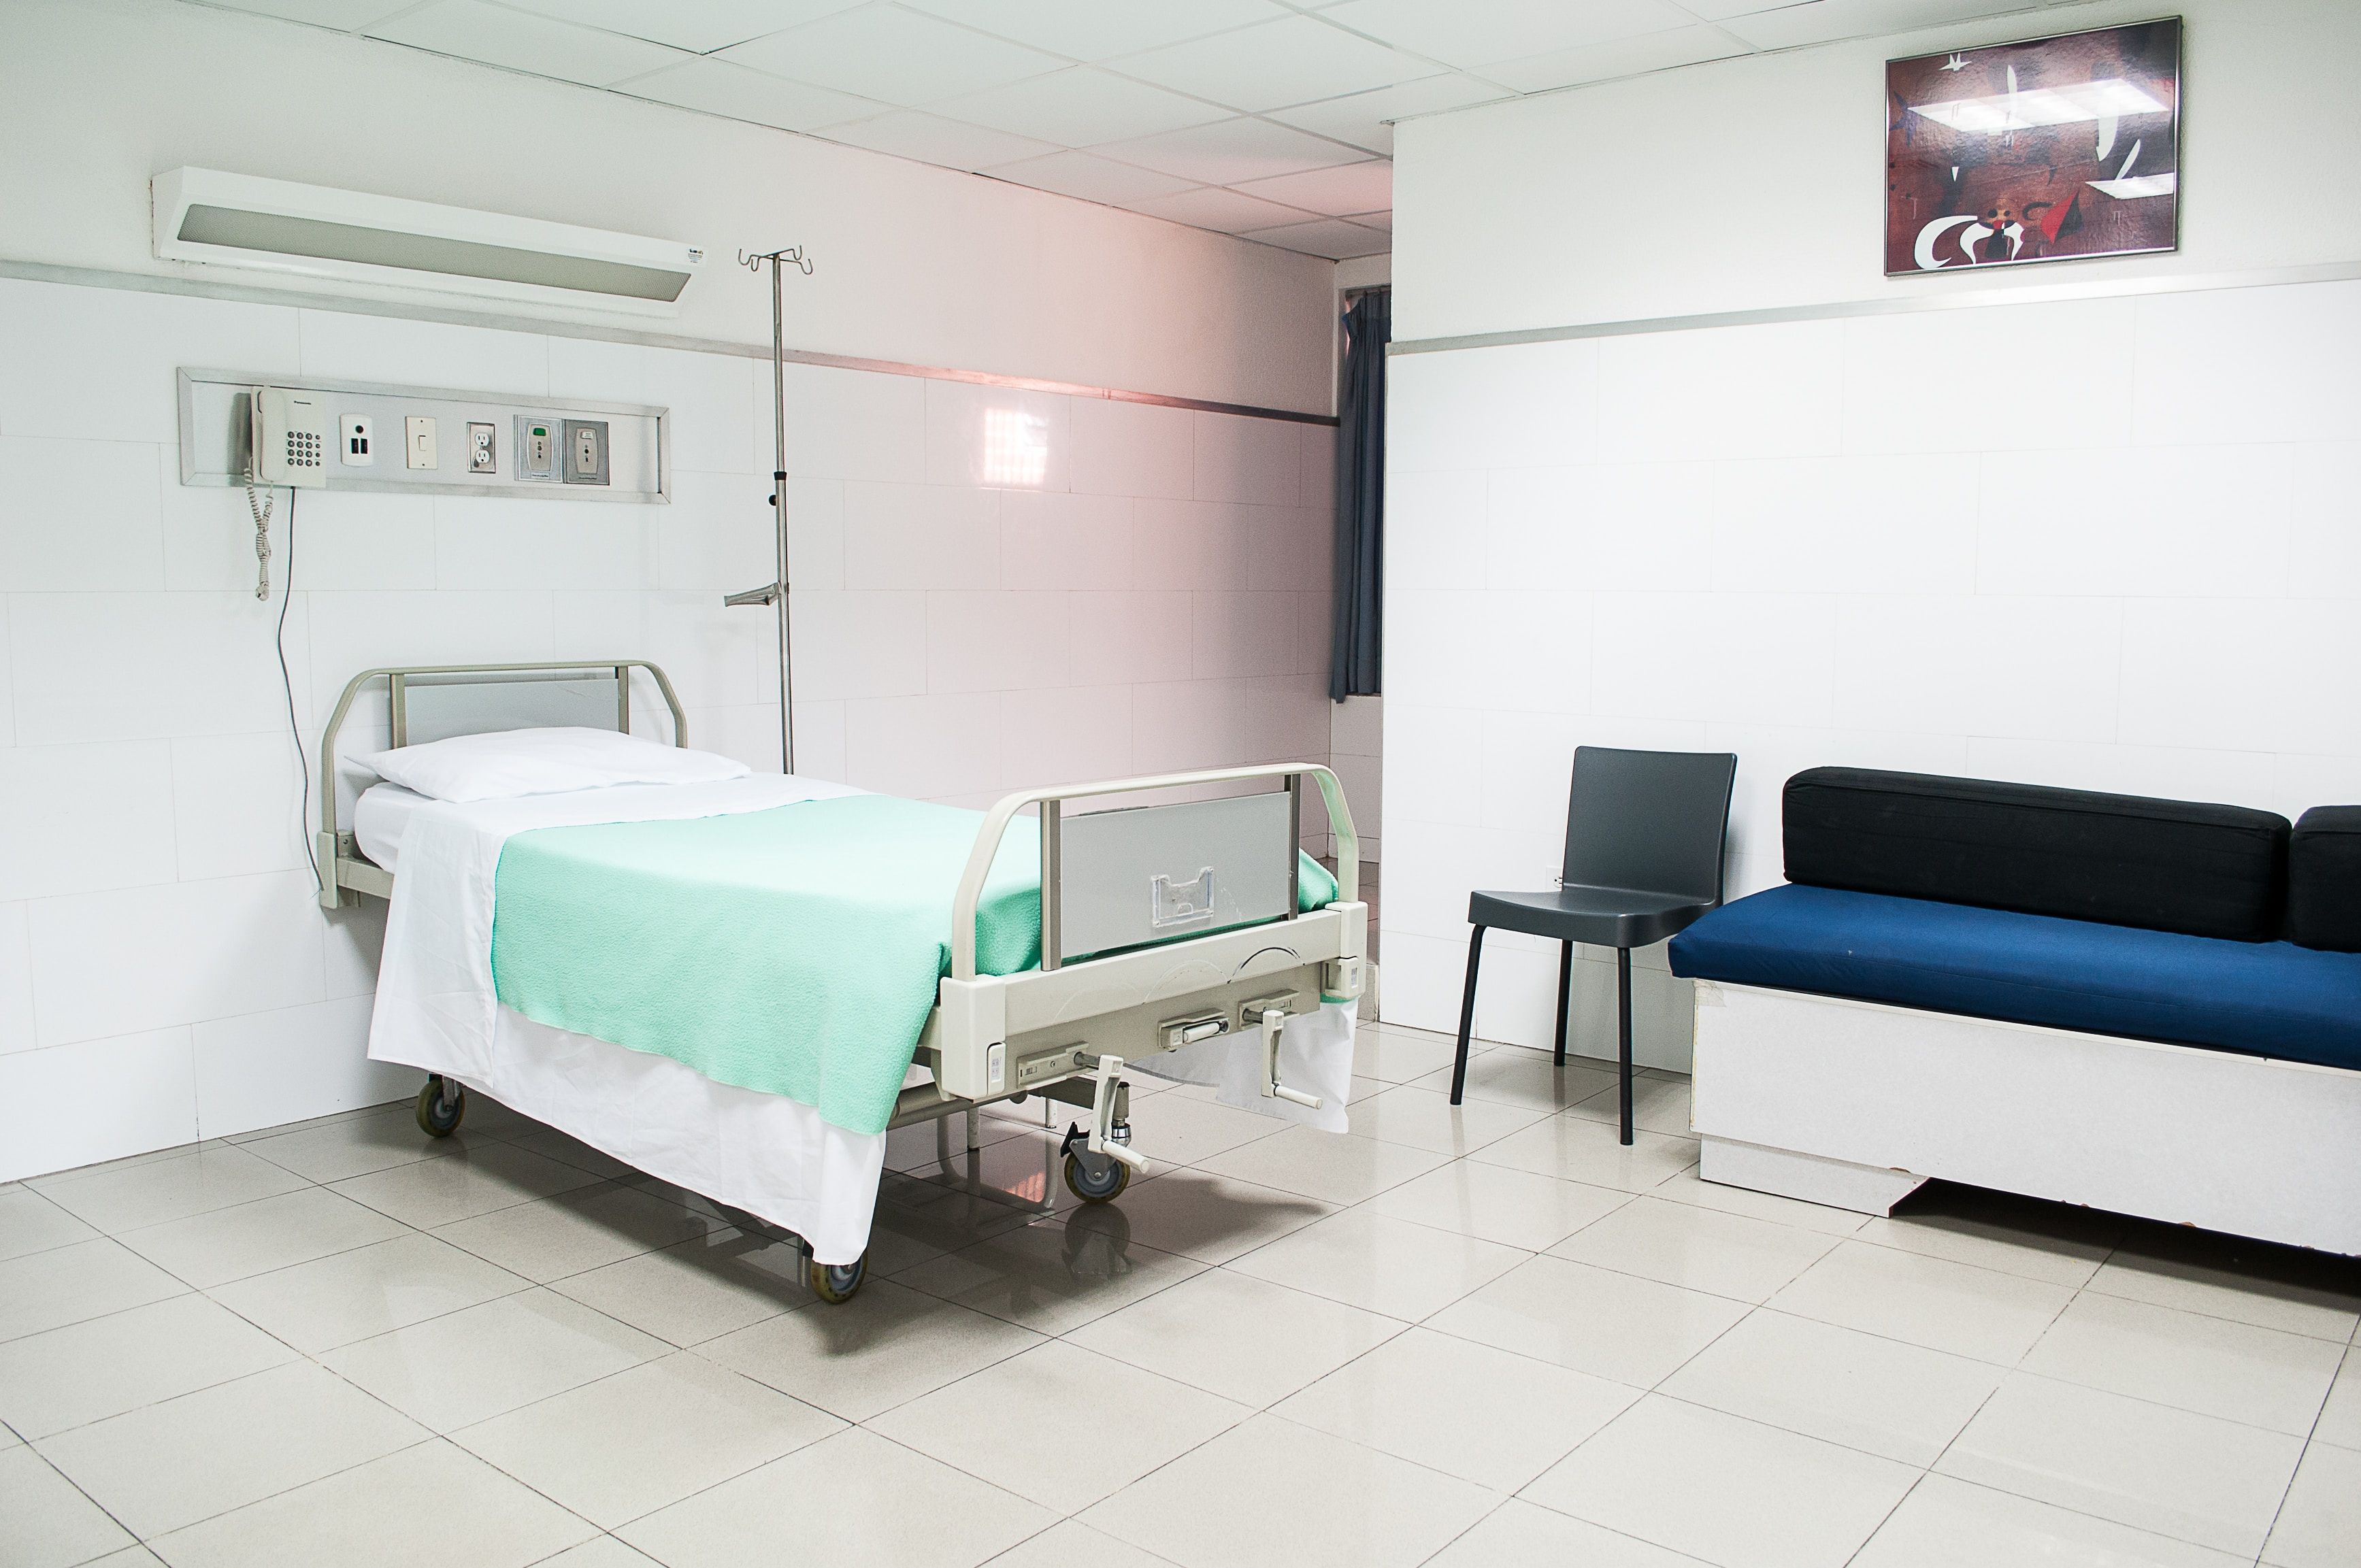 Hospital Picture. Download Free Image